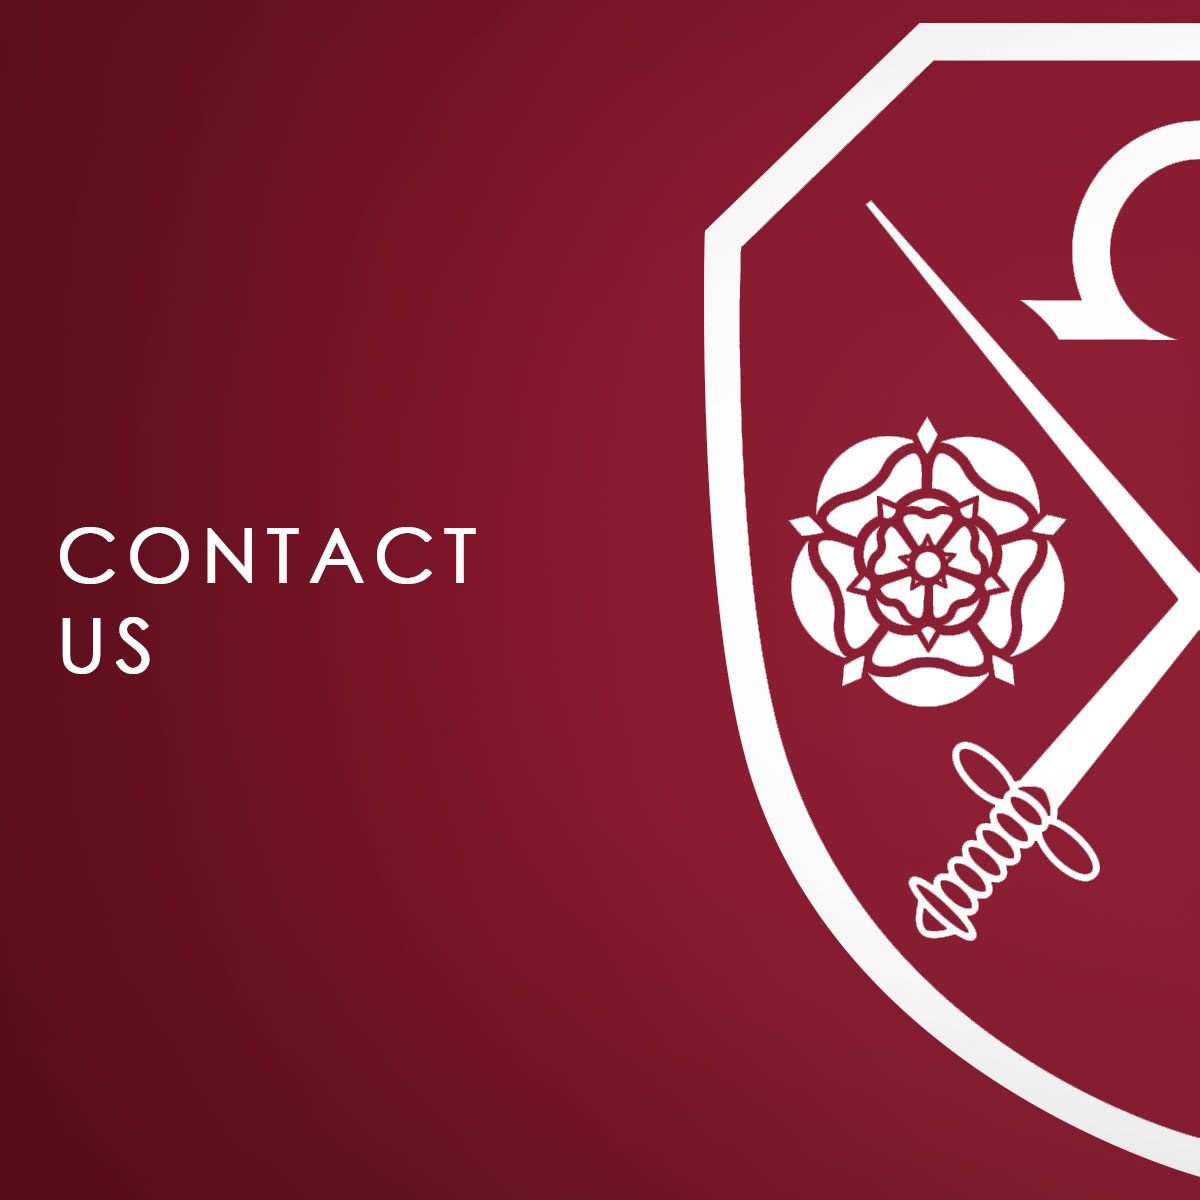 A maroon background with the East Barnet School logo which says Contact Us